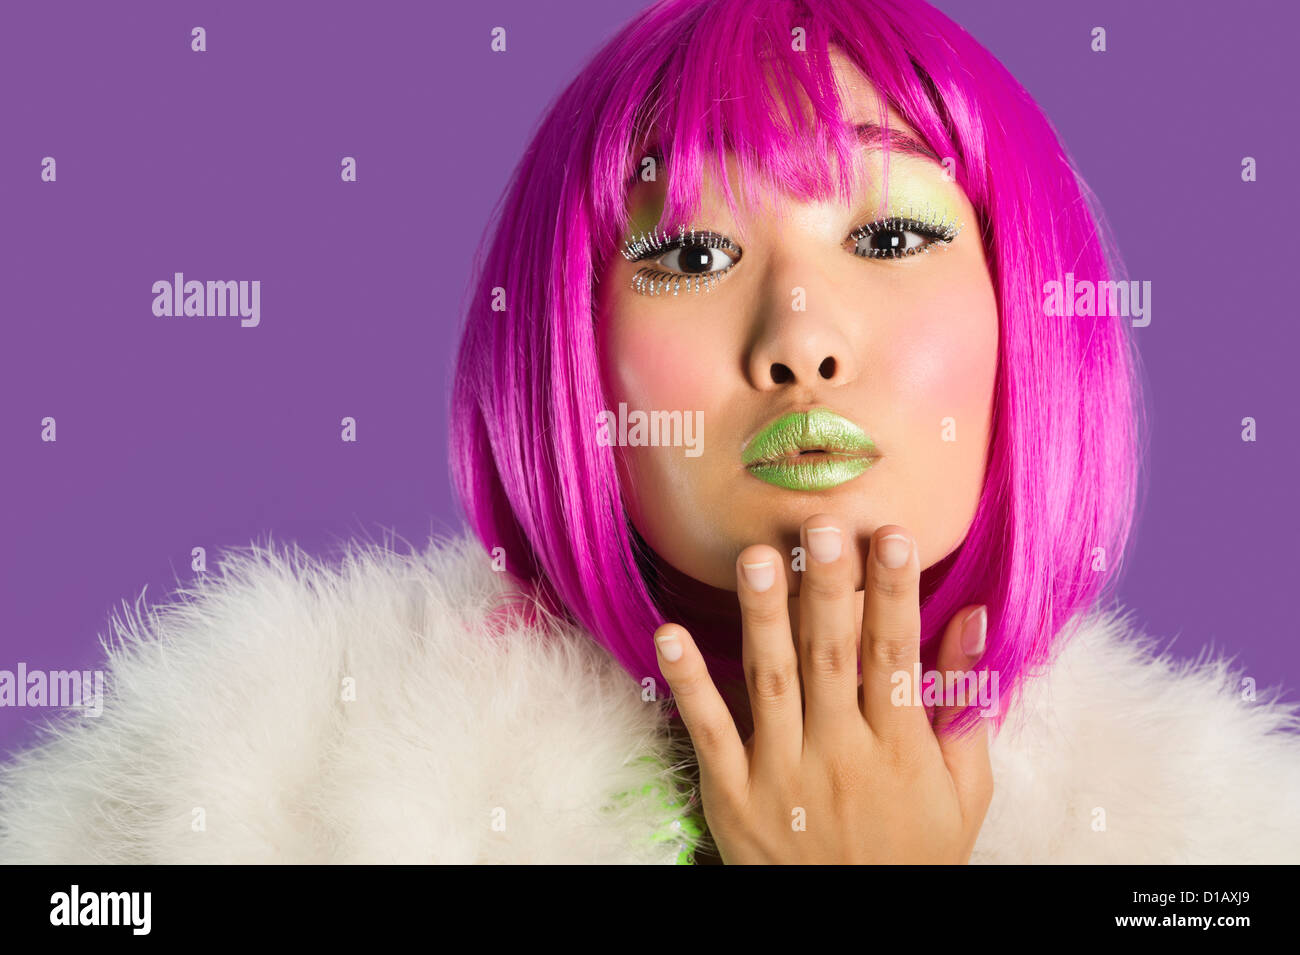 Portrait young funky woman in pink wig blowing kiss over purple background Stock Photo